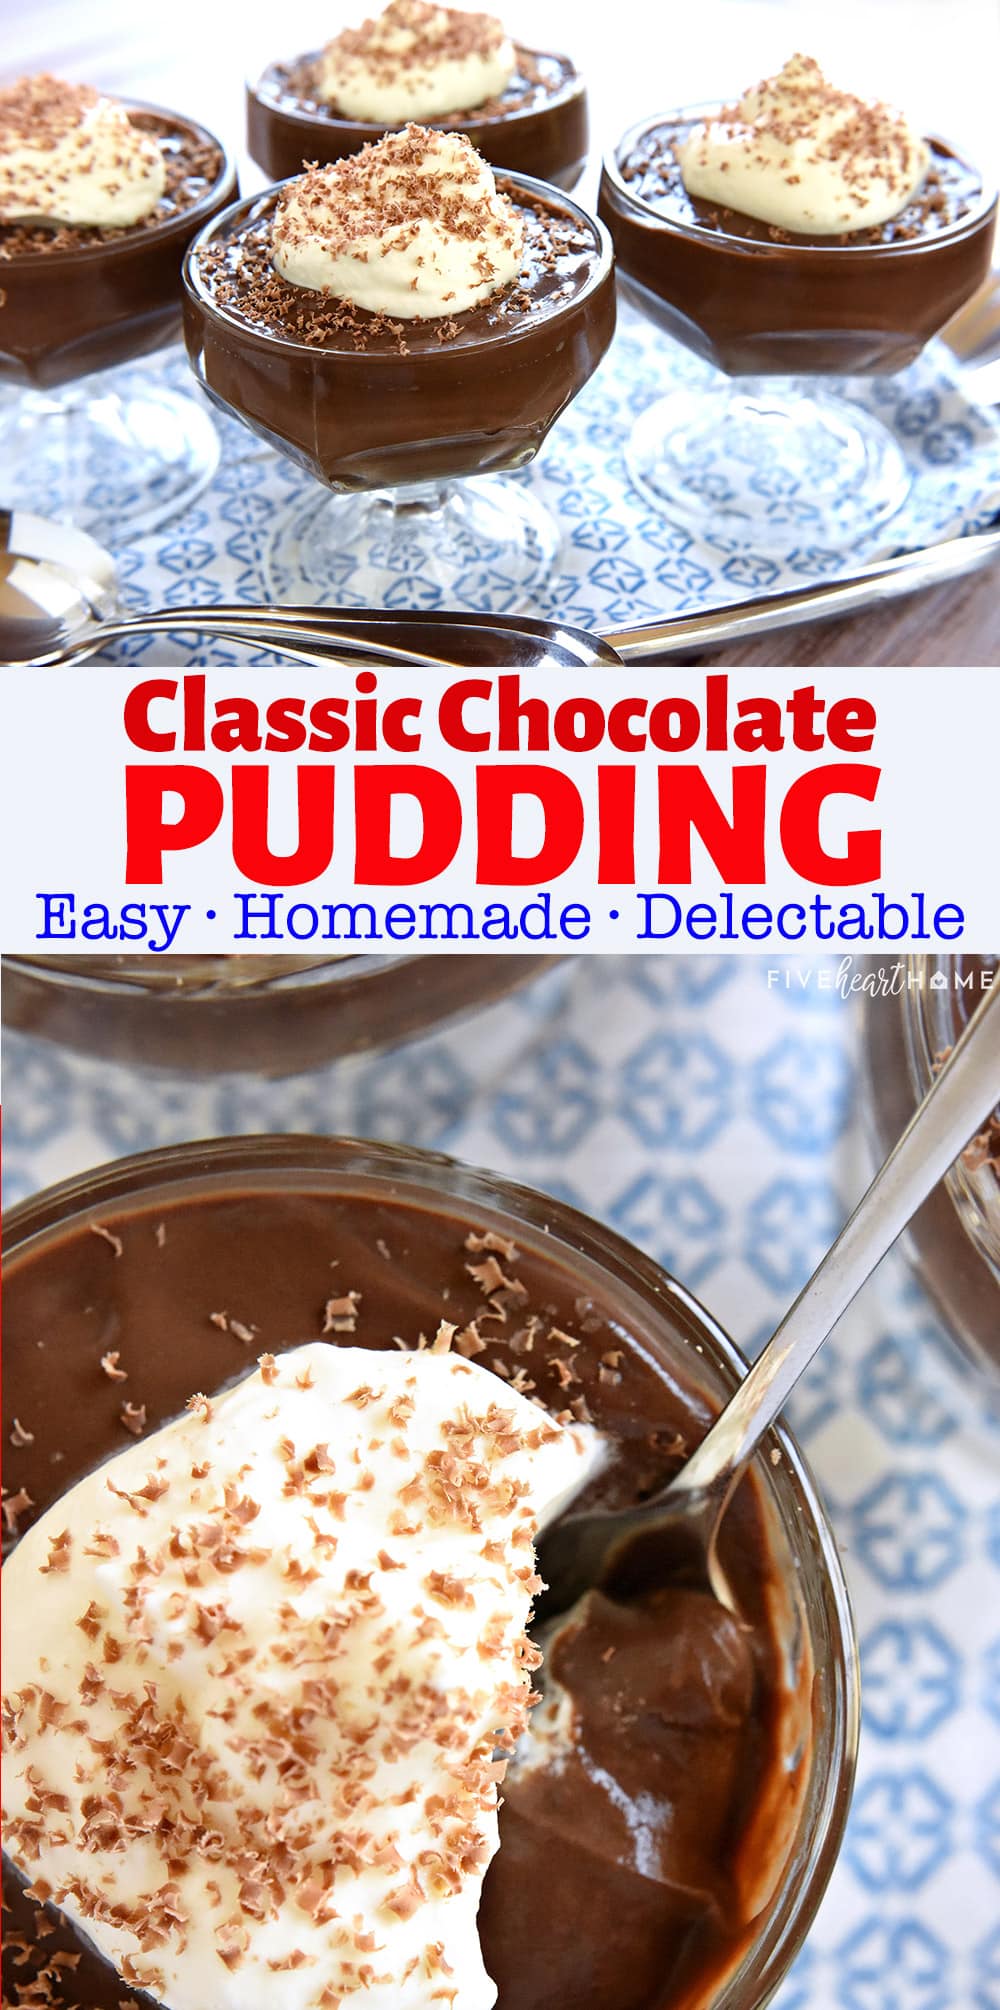 Homemade Chocolate Pudding ~ a classic, creamy dessert that's surprisingly easy to make…and after trying this silky, decadent chocolate pudding recipe, you'll never want store-bought again! | FiveHeartHome.com via @fivehearthome